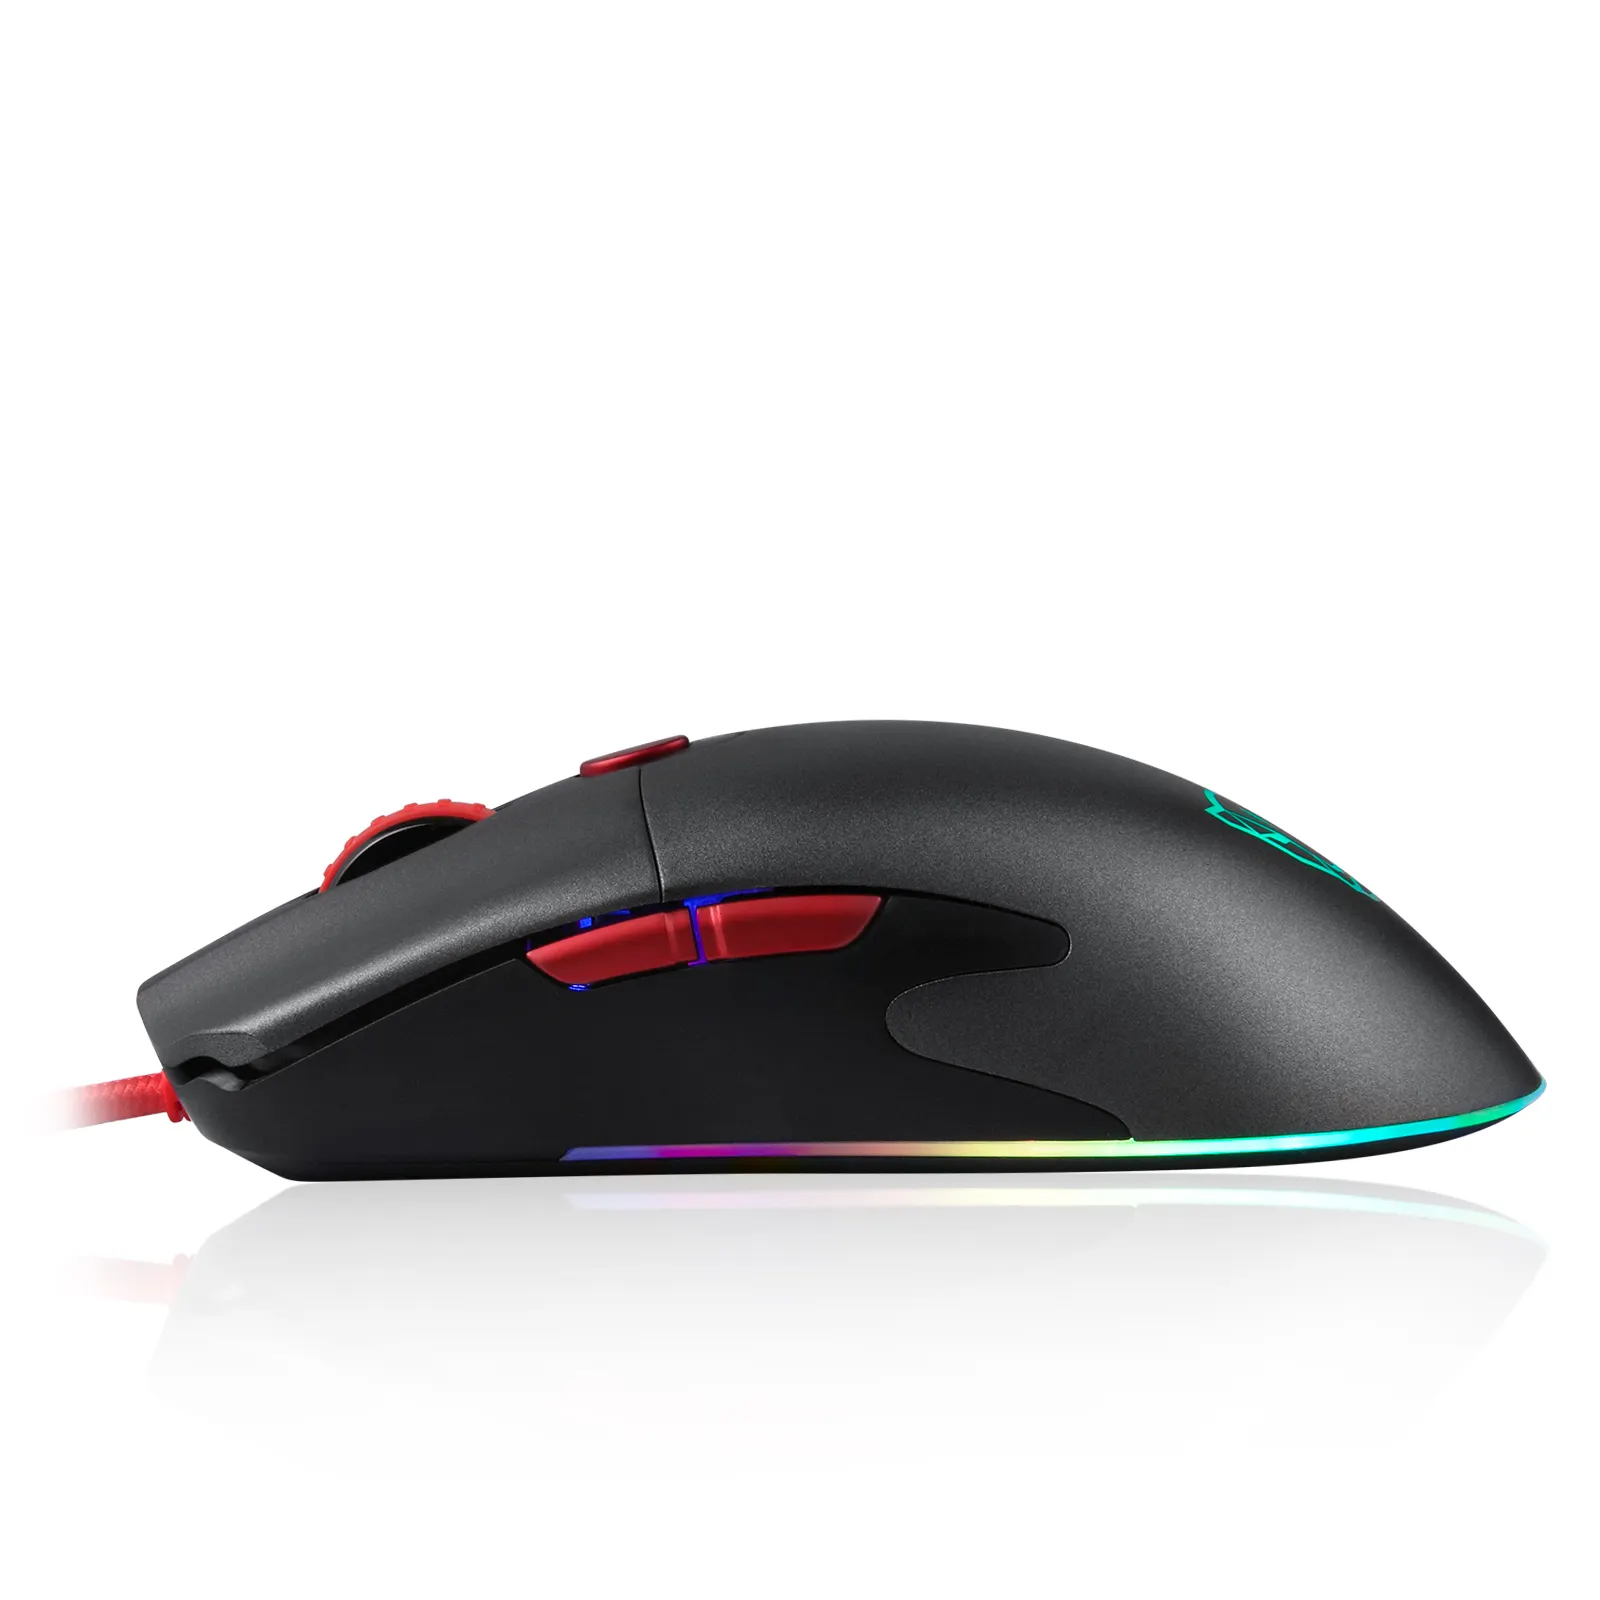 Motospeed V400 Gaming Mouse Rgb Achtergrondverlichting 9 Programmeerbare Knoppen Oem Gaming Muis